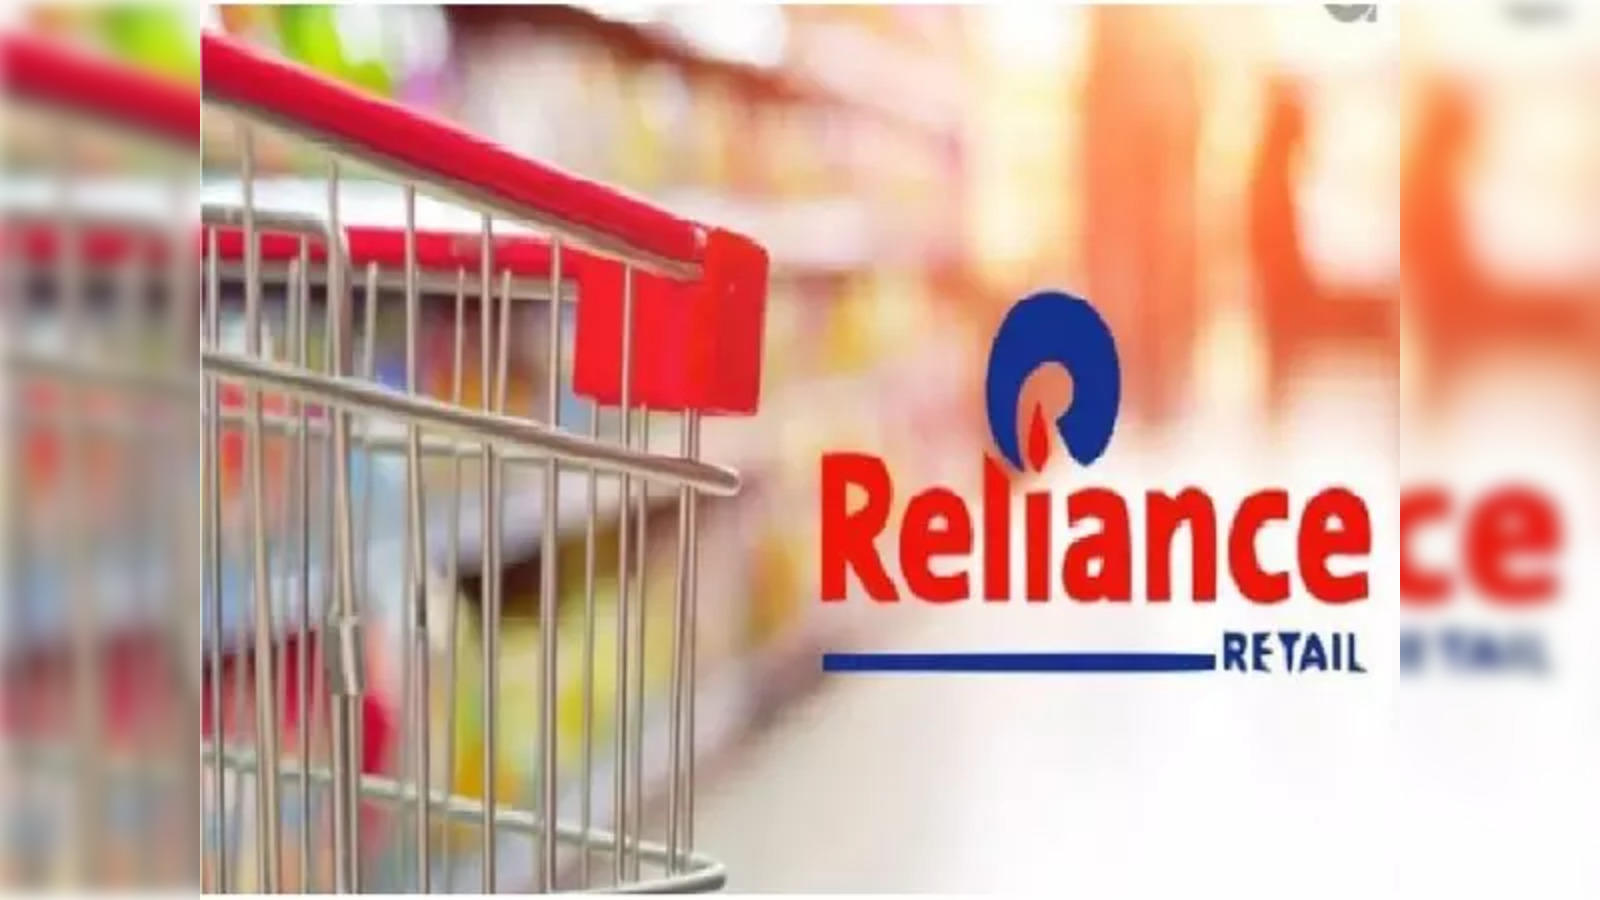 Reliance Retail: The Success of India's Largest Retailer